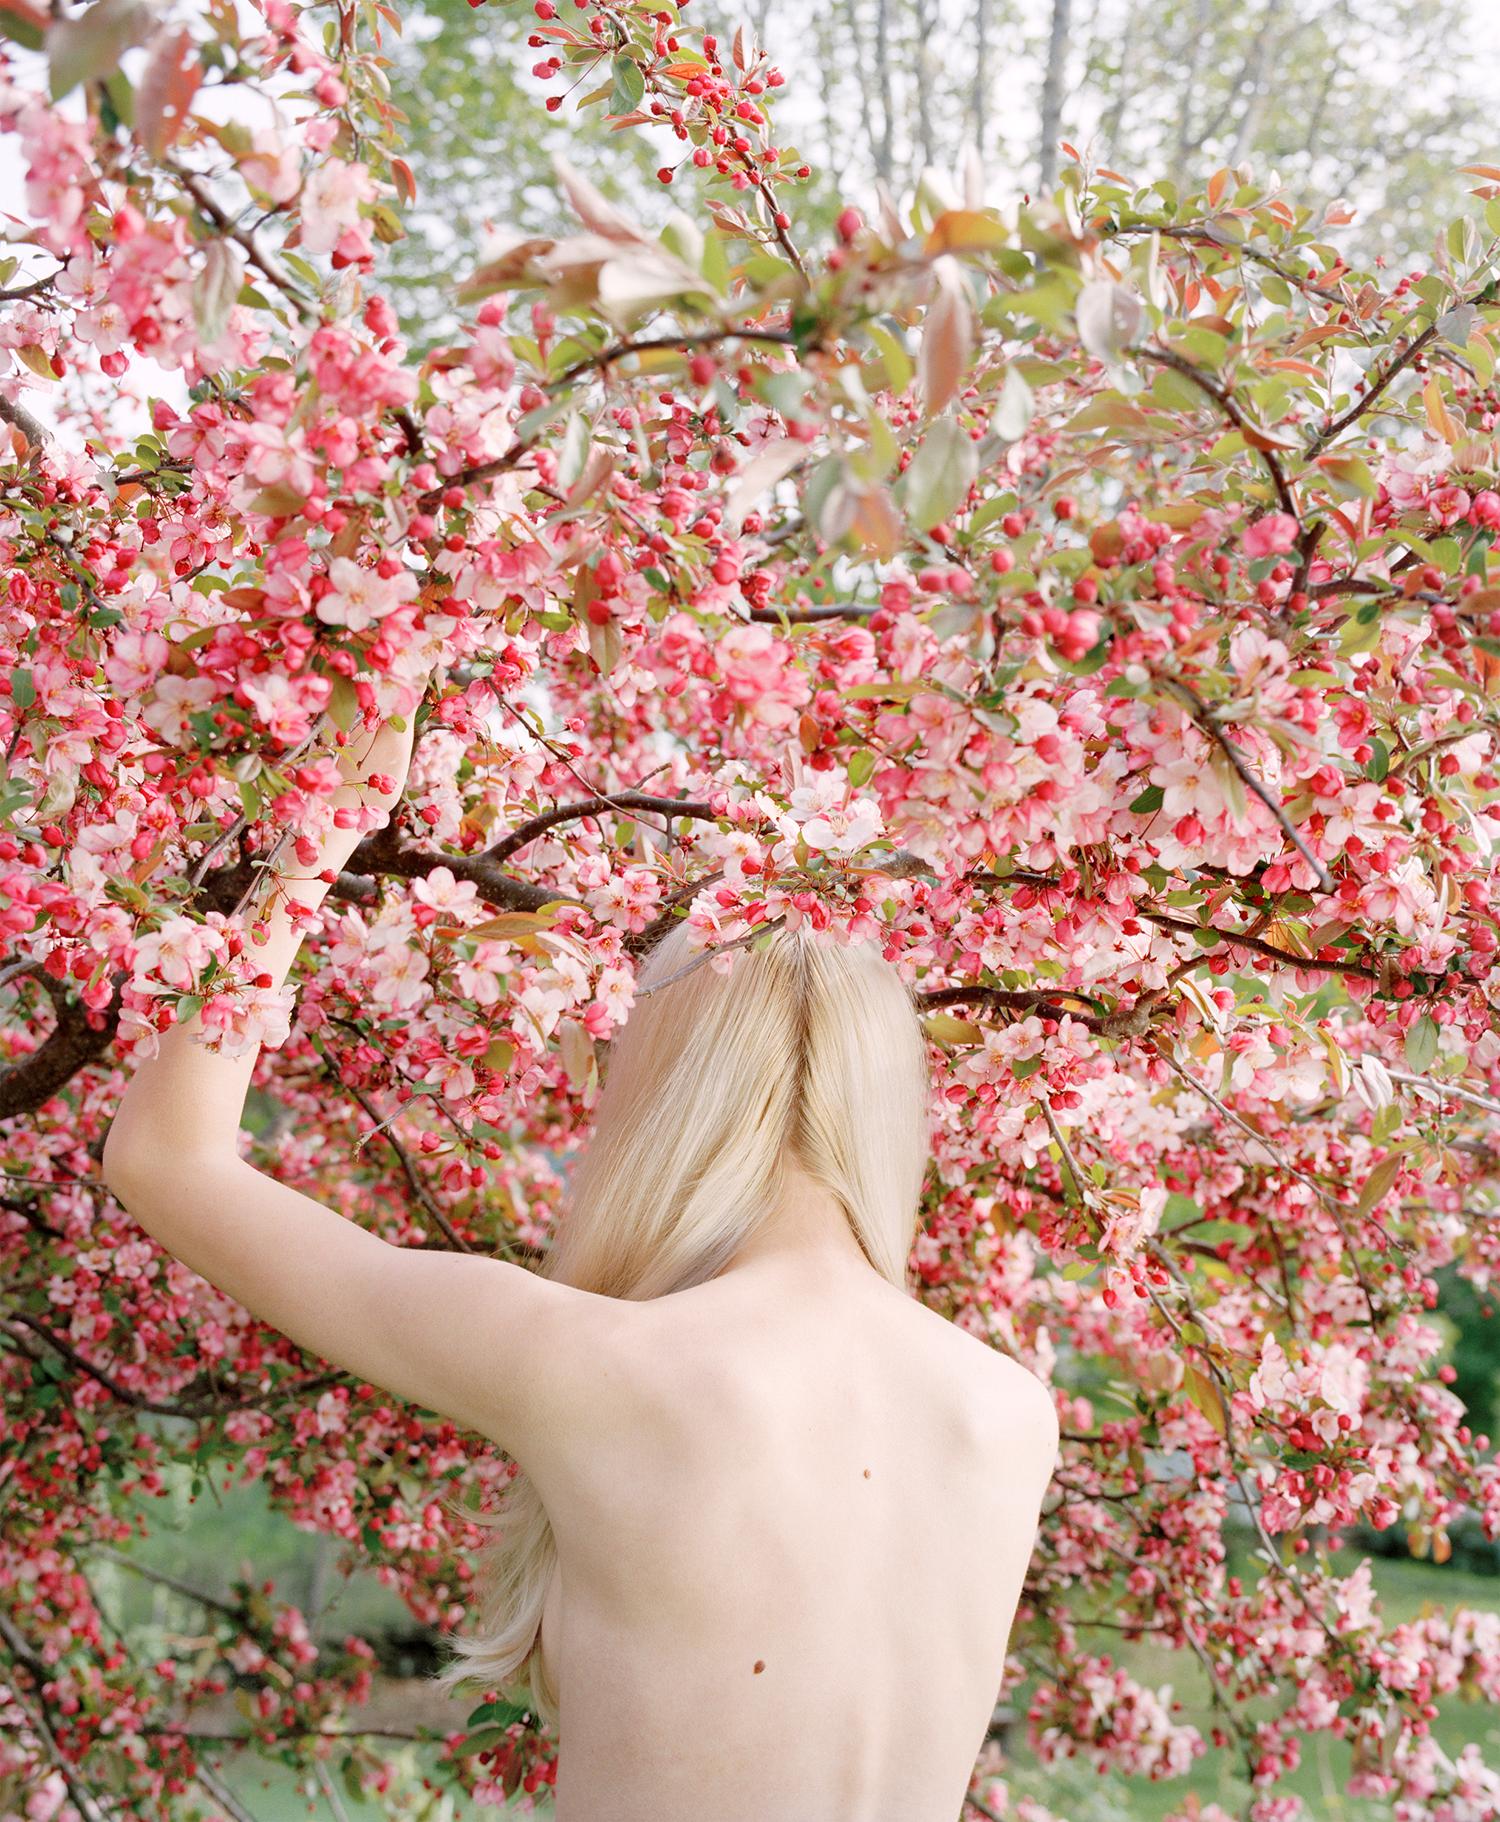 Raising the Cherry Tree, 2016 - Jocelyn Lee (Colour Photography)
Signed, dated and inscribed with title on reverse
Archival pigment print

Available in two sizes:
40 x 30 inches - edition of 5
50 x 40 inches - edition of 5

Throughout her career,